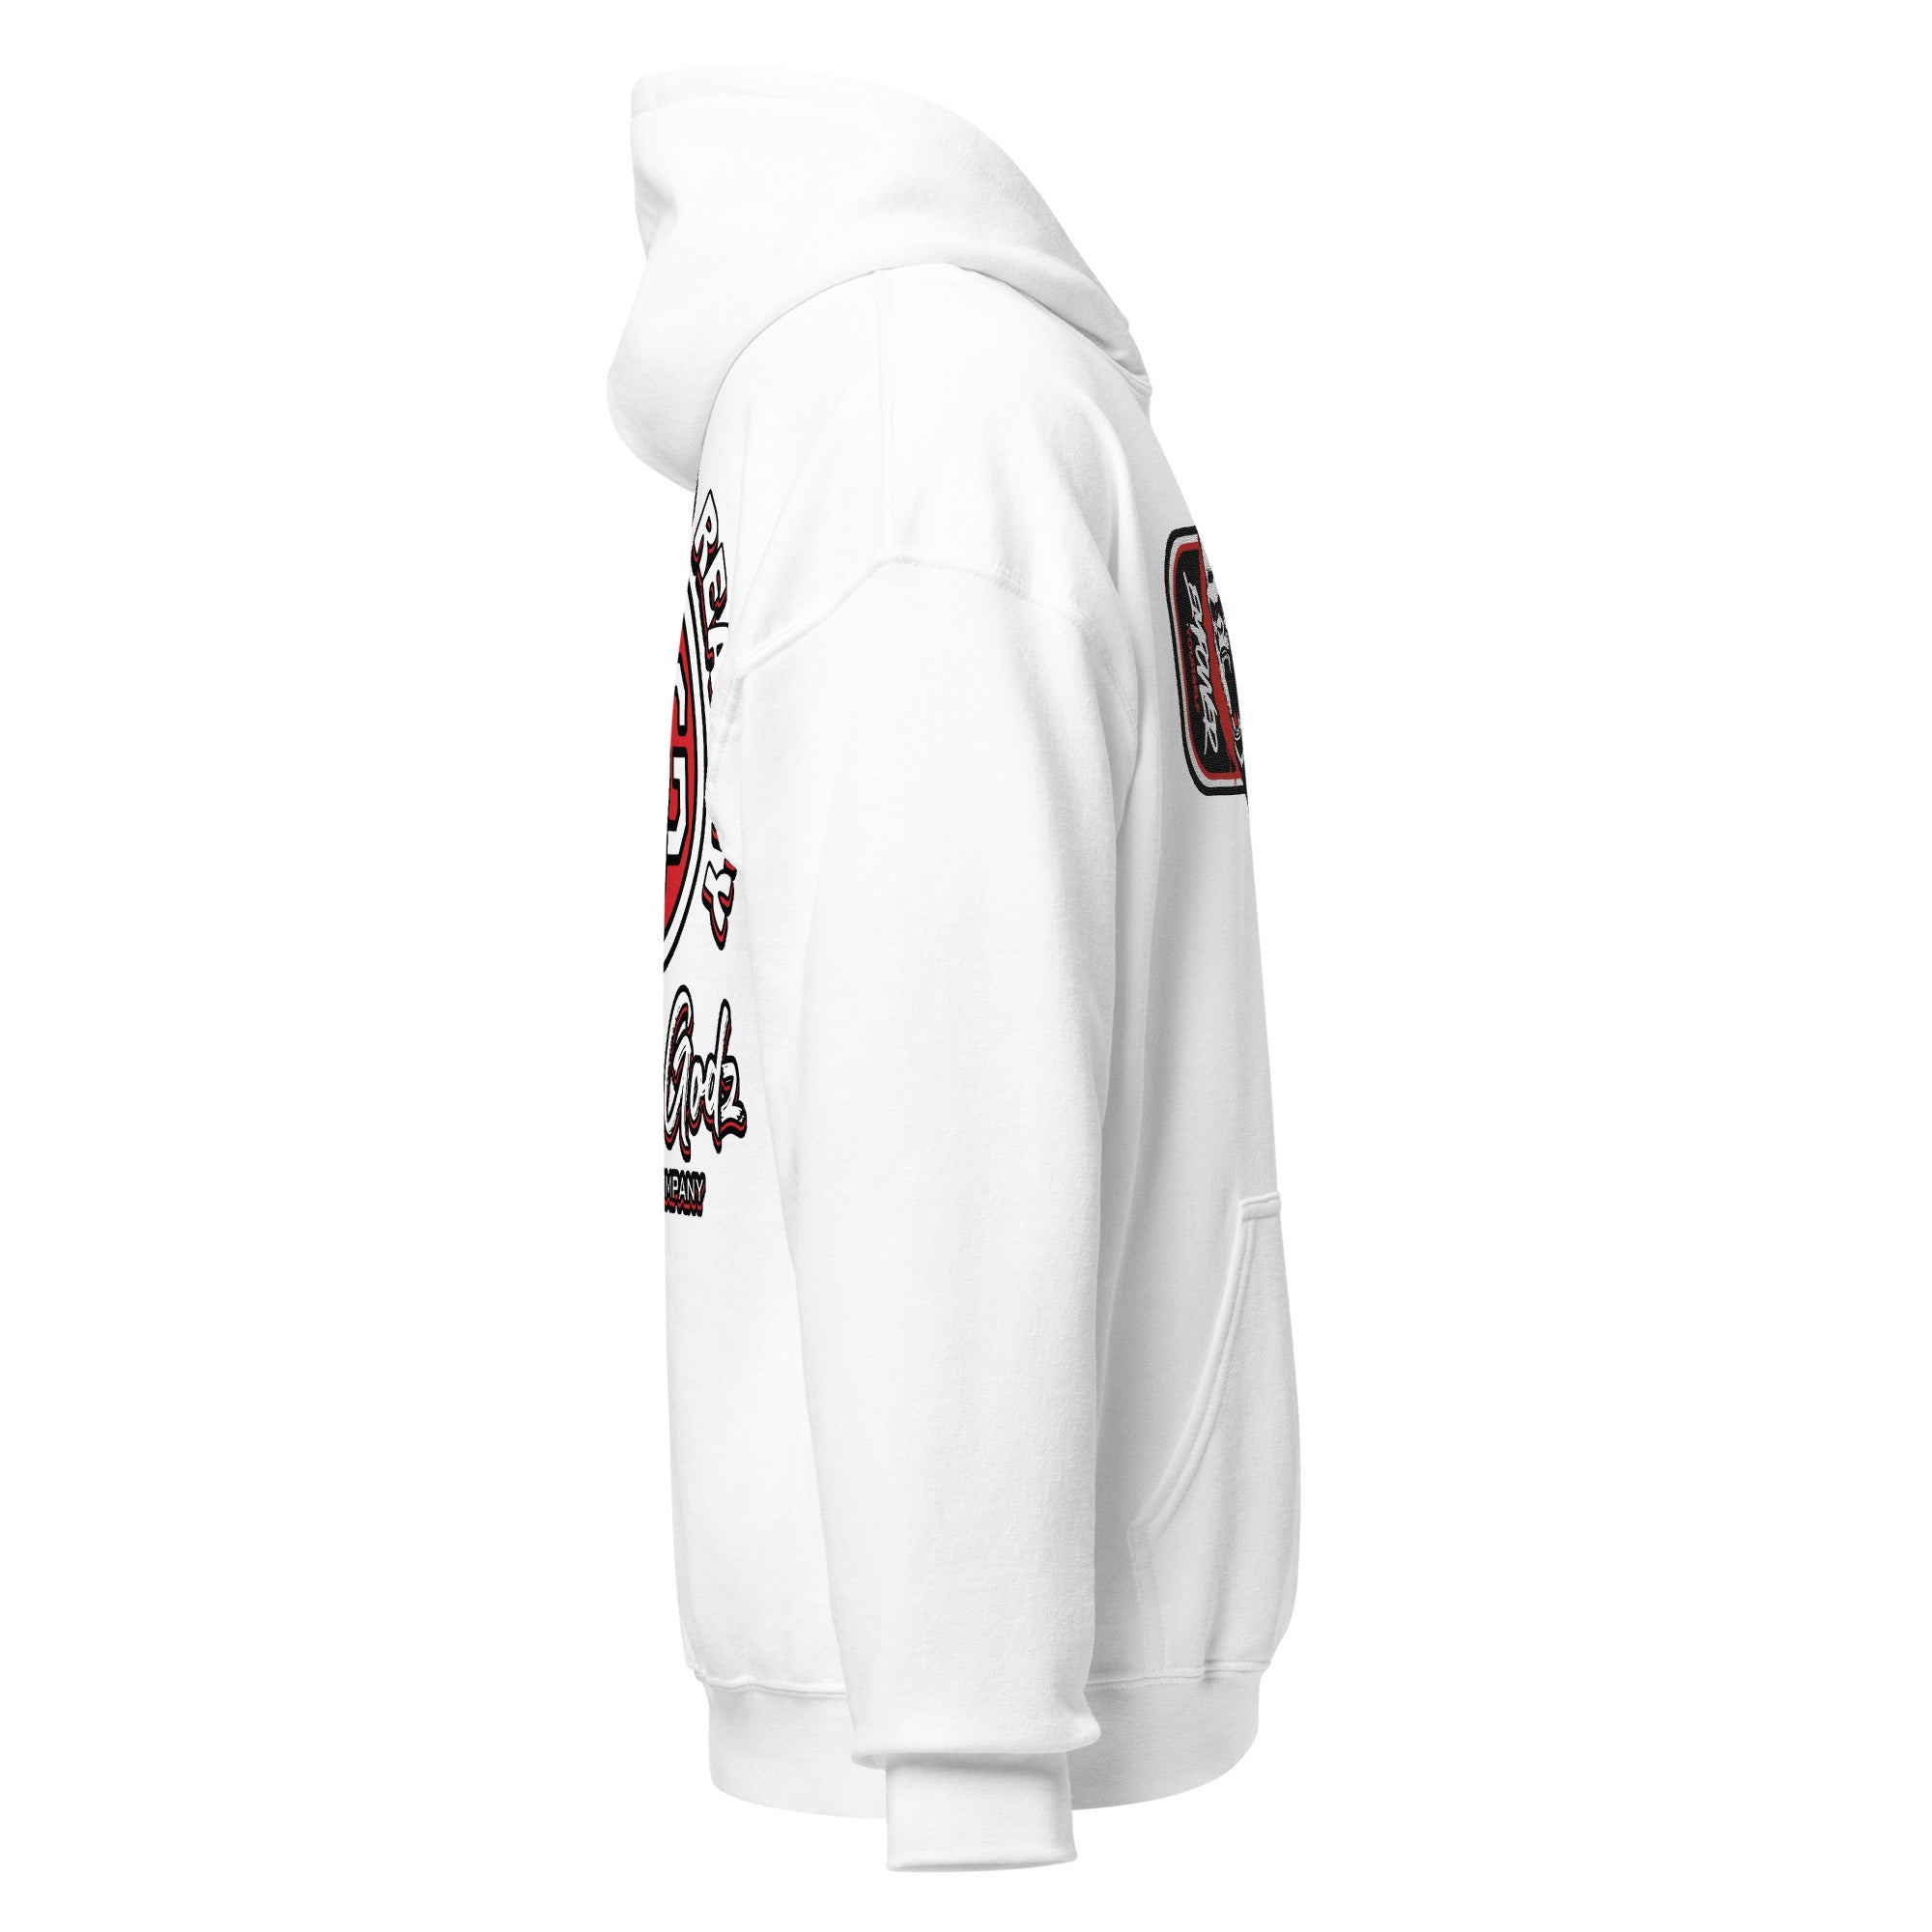 Dreams into Reality Embroidered/DTG Unisex Hoodie